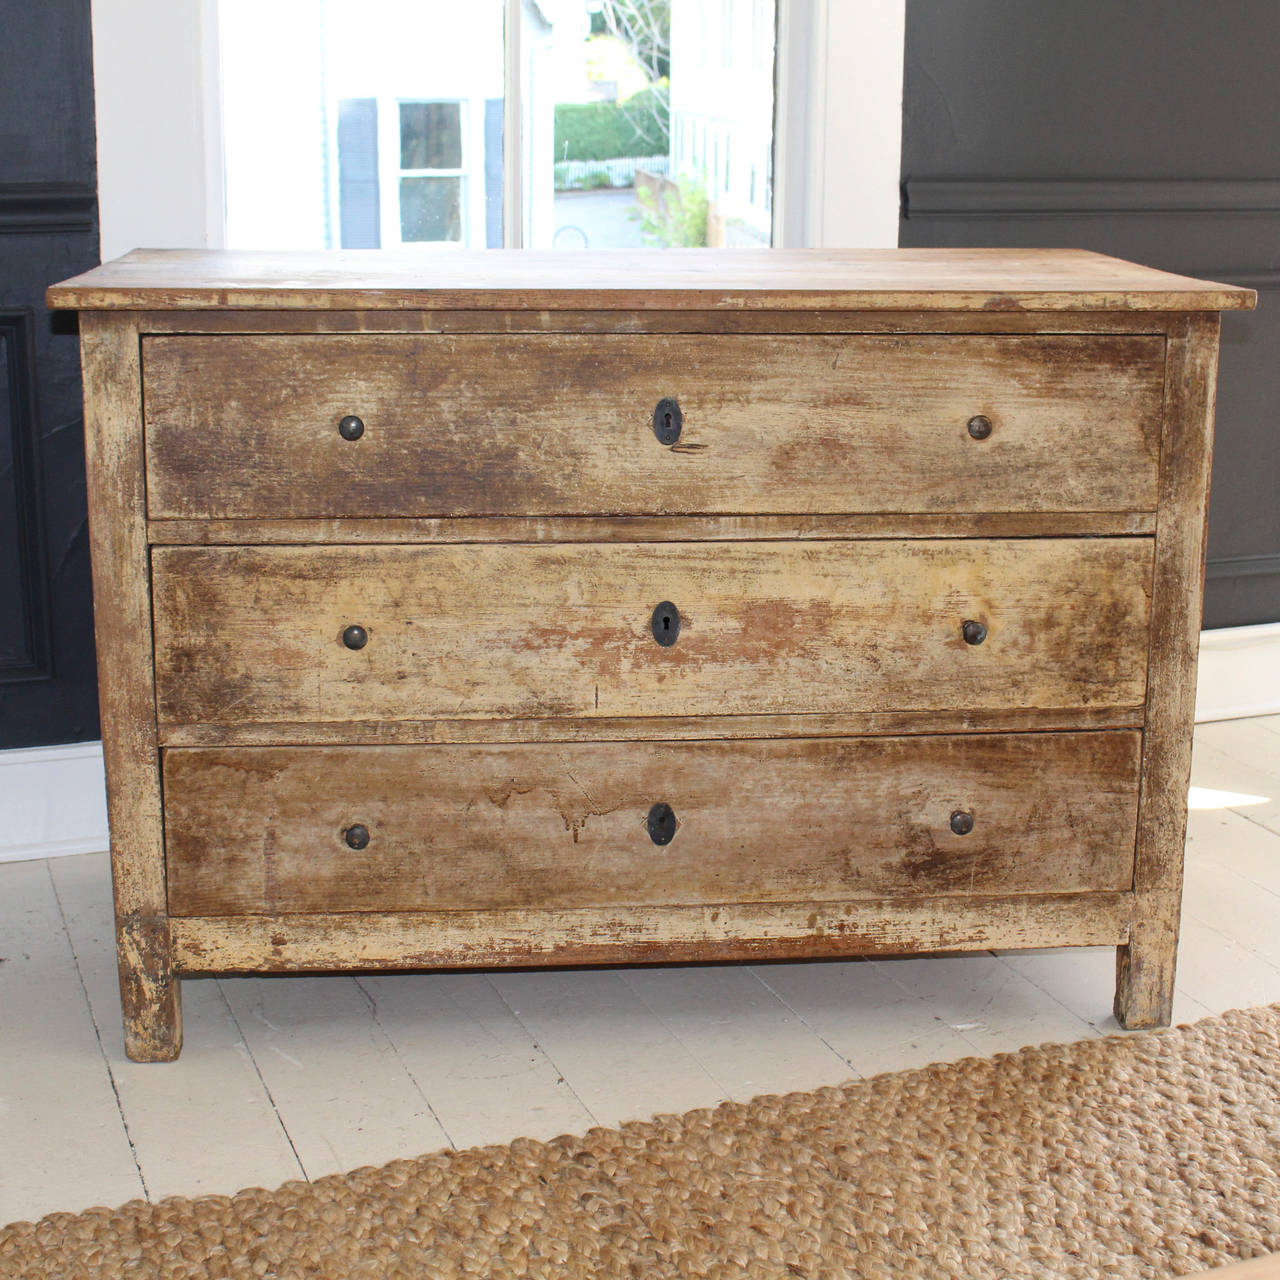 Three-drawer chest, 19th century, France, in original paint, with newer escutcheons and knobs.